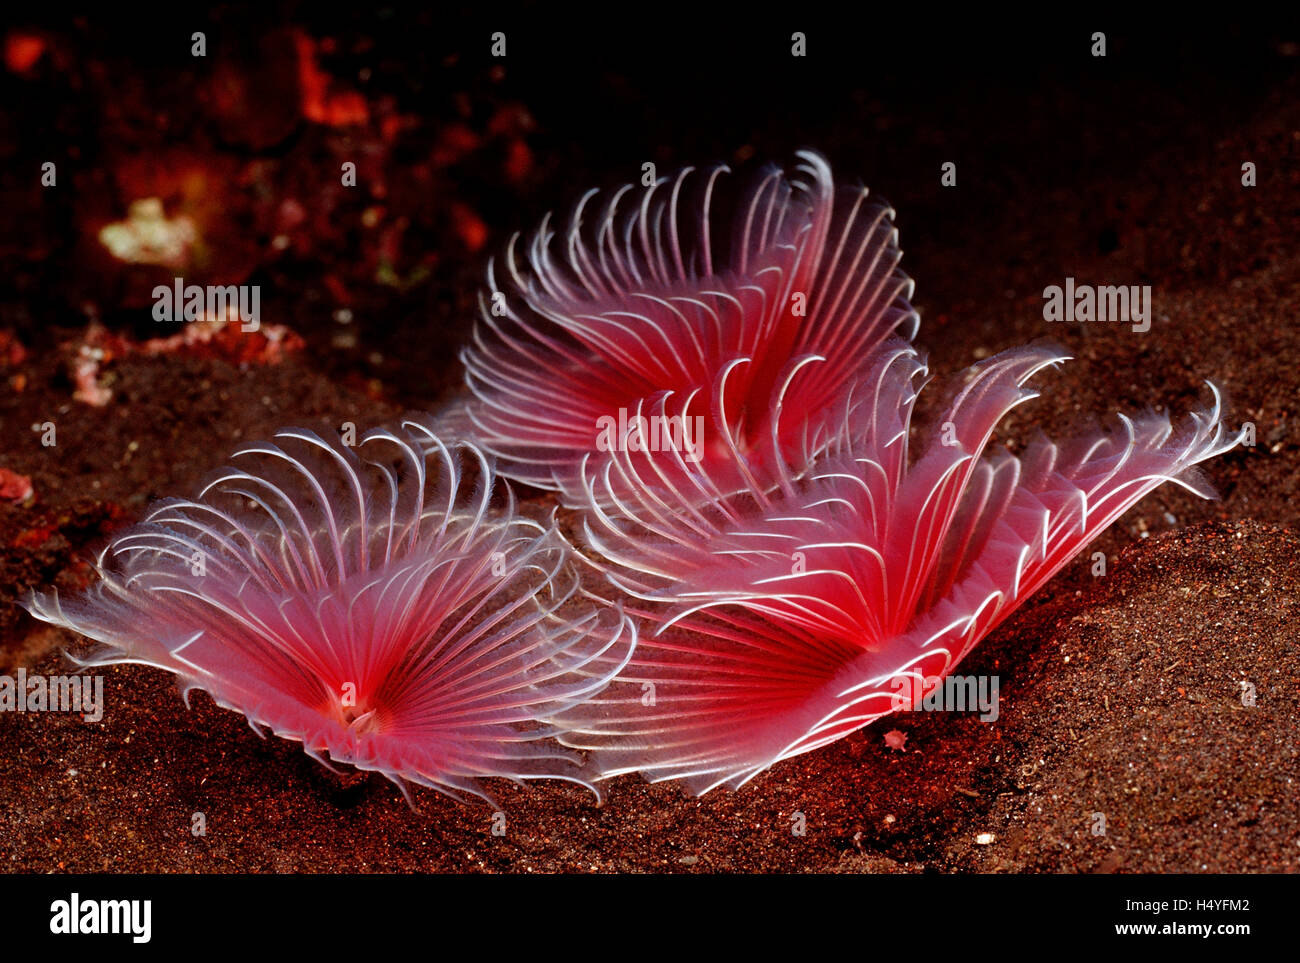 Feather duster worms (Sabellastarte sp.) Bali, Indian Ocean, Indonesia Stock Photo